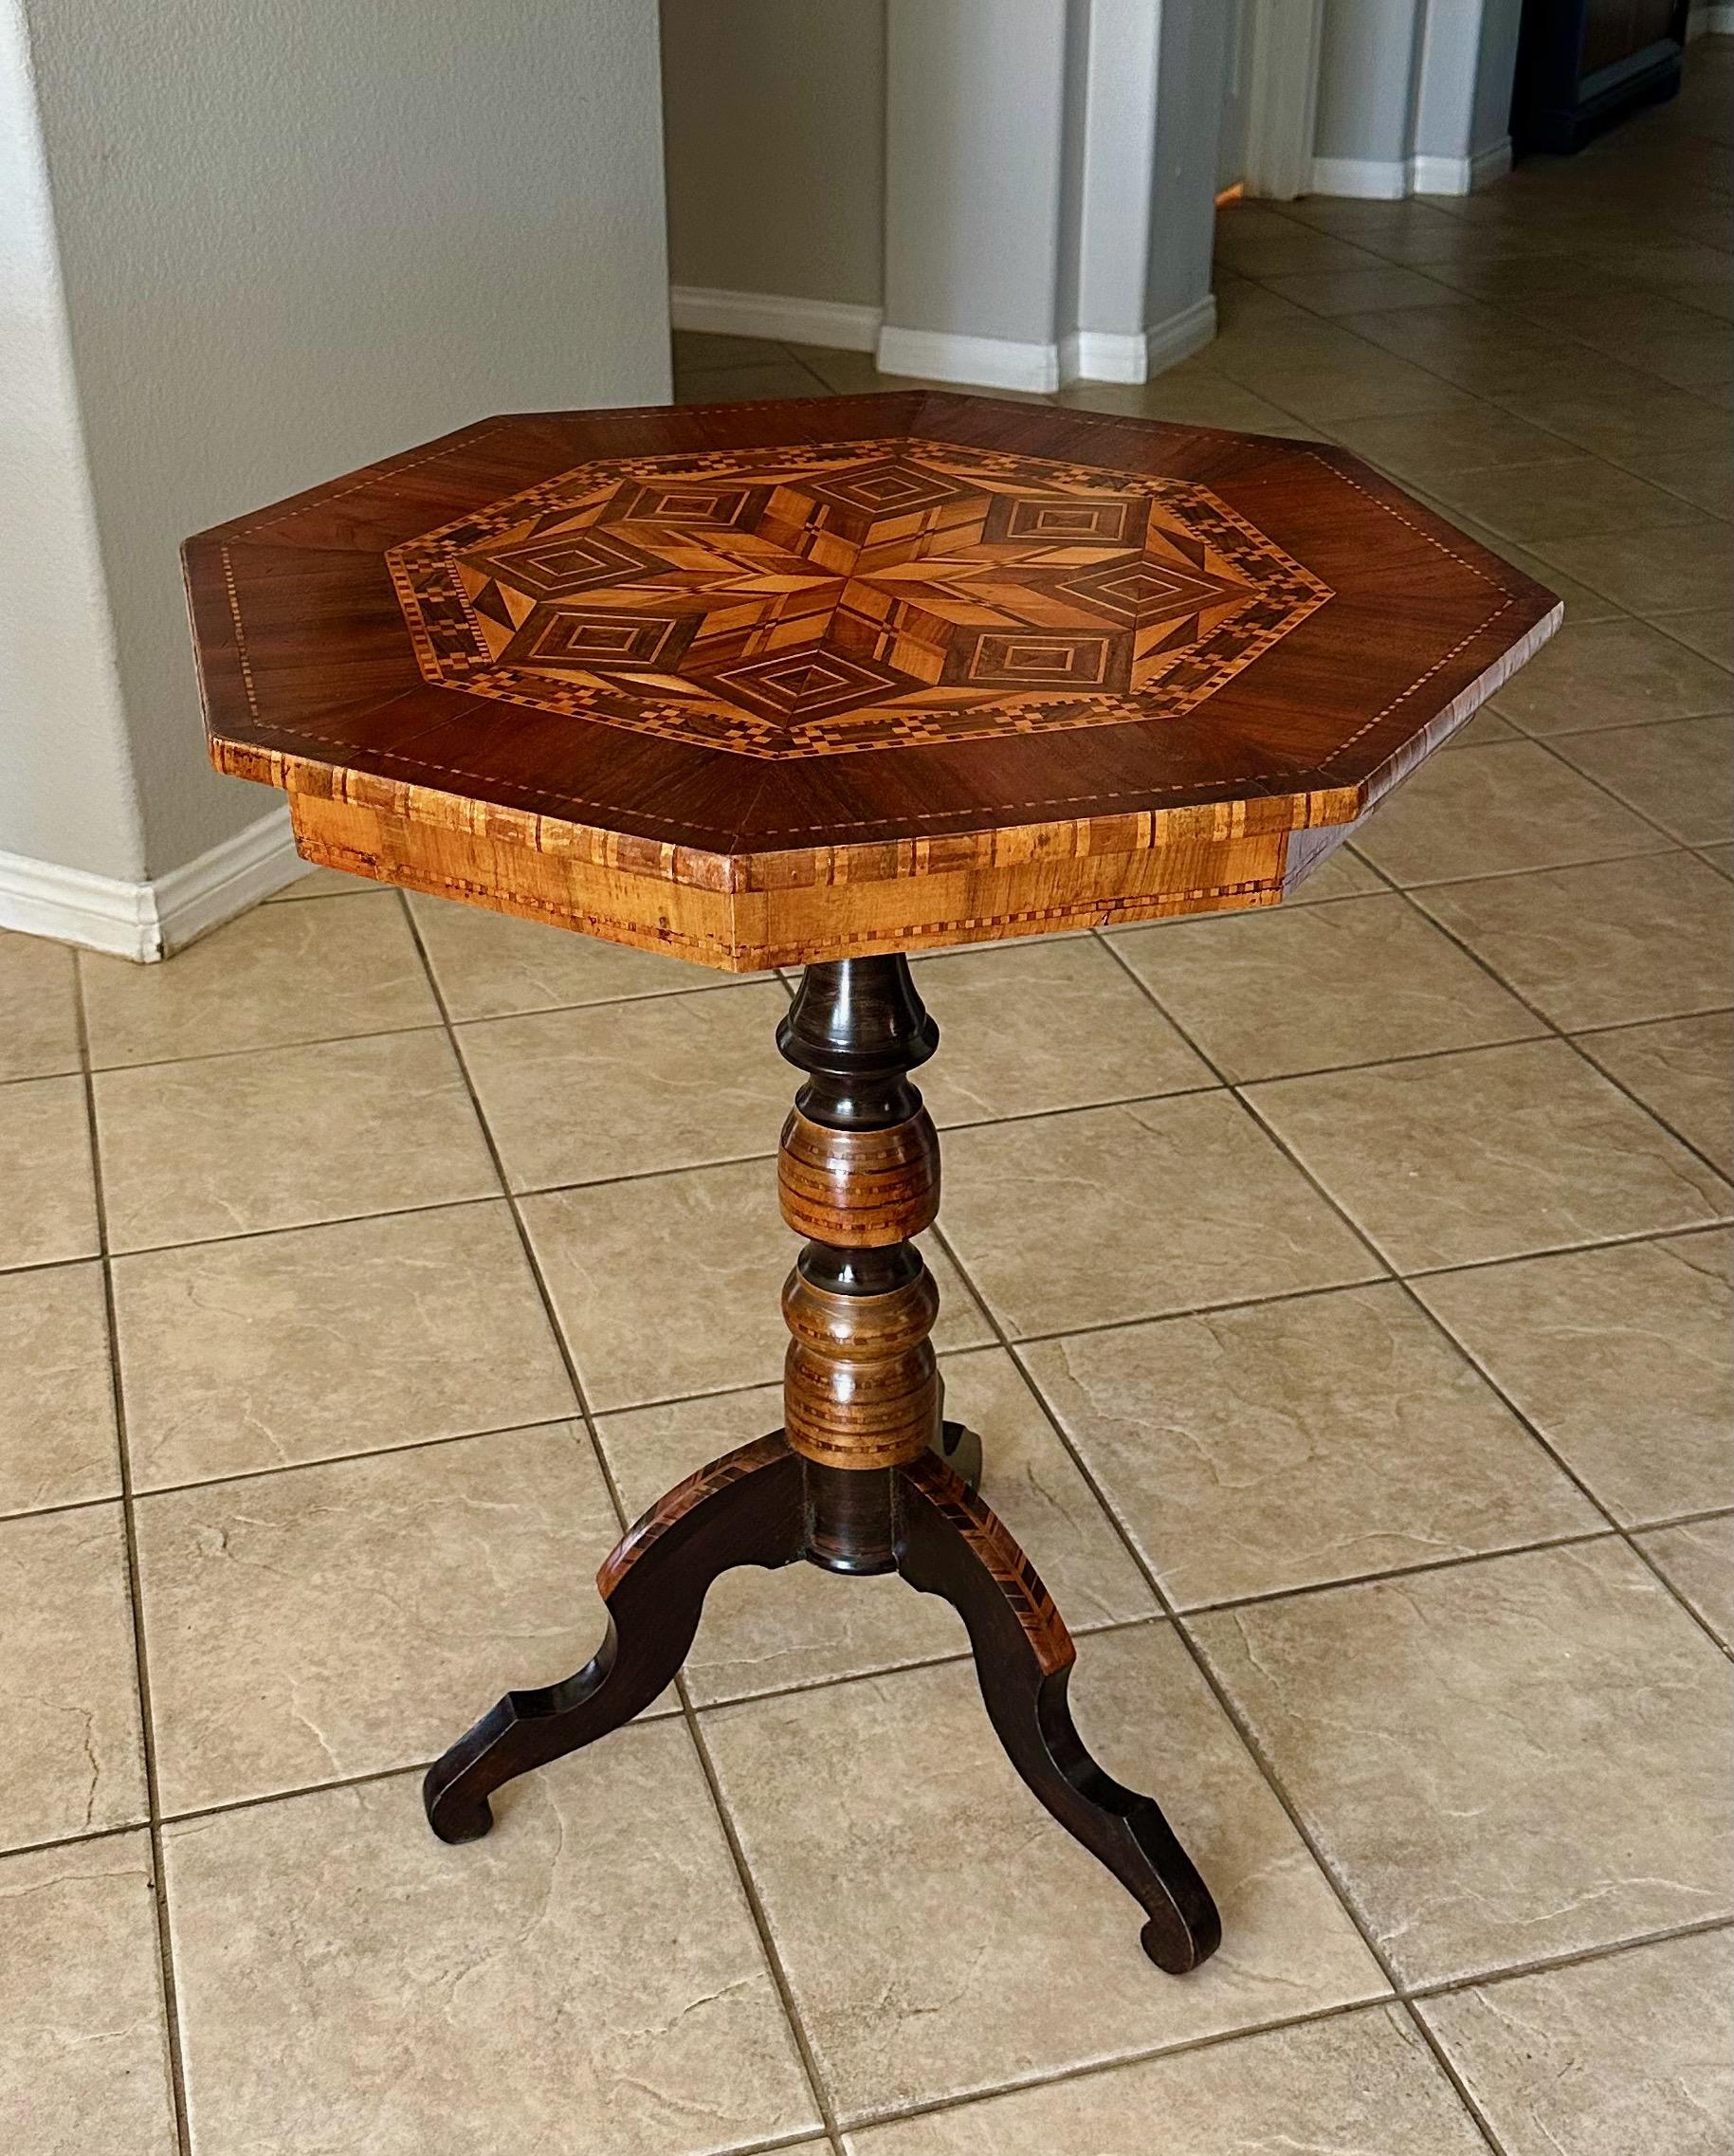 Italian Sorrento octagon side table made of maple and fruitwood Inlaid marquetry.